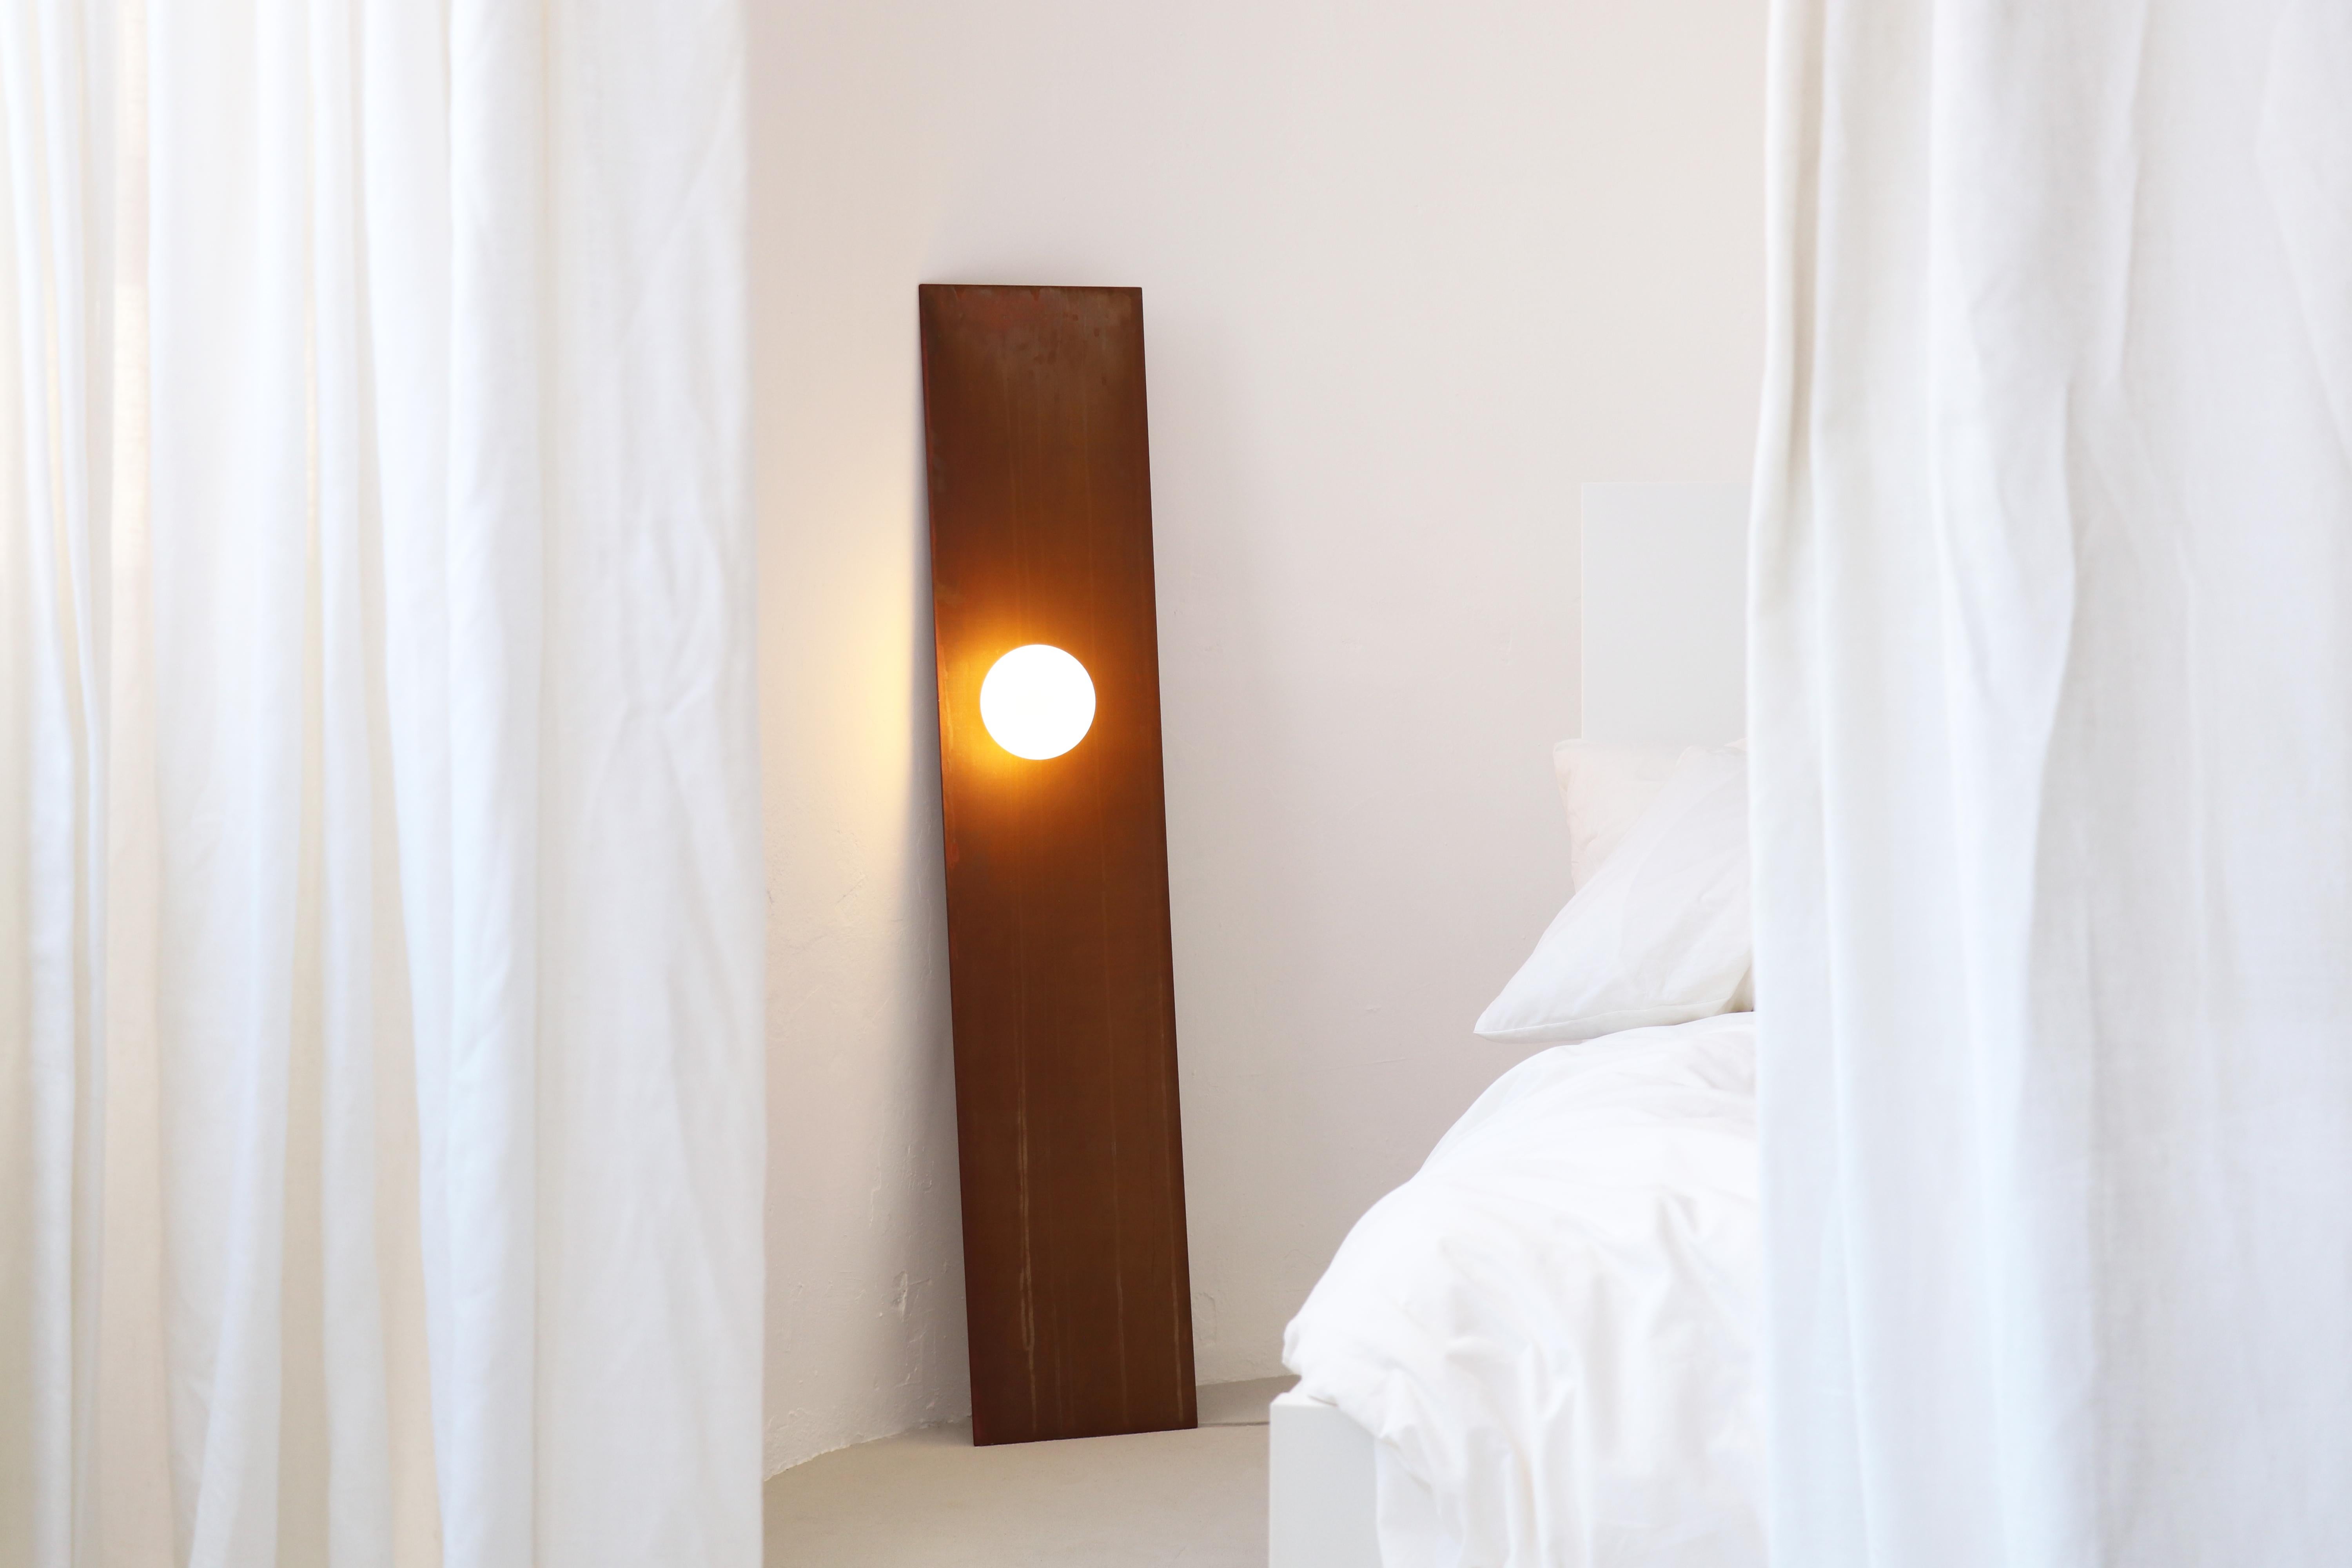 Other Wall Leaning Light by Batten and Kamp